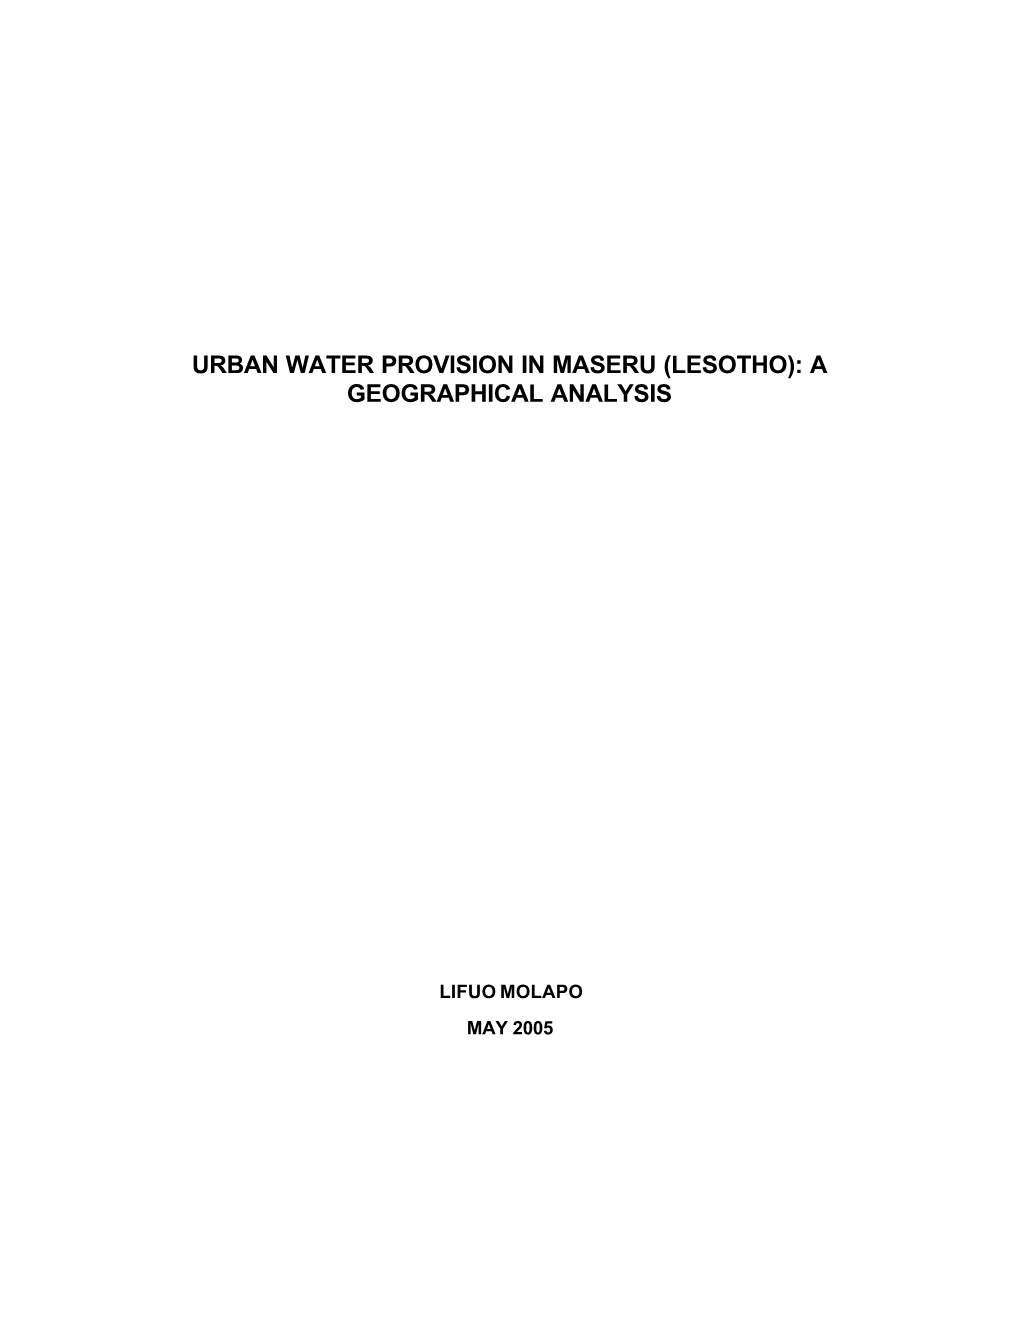 Urban Water Provision in Maseru (Lesotho): a Geographical Analysis